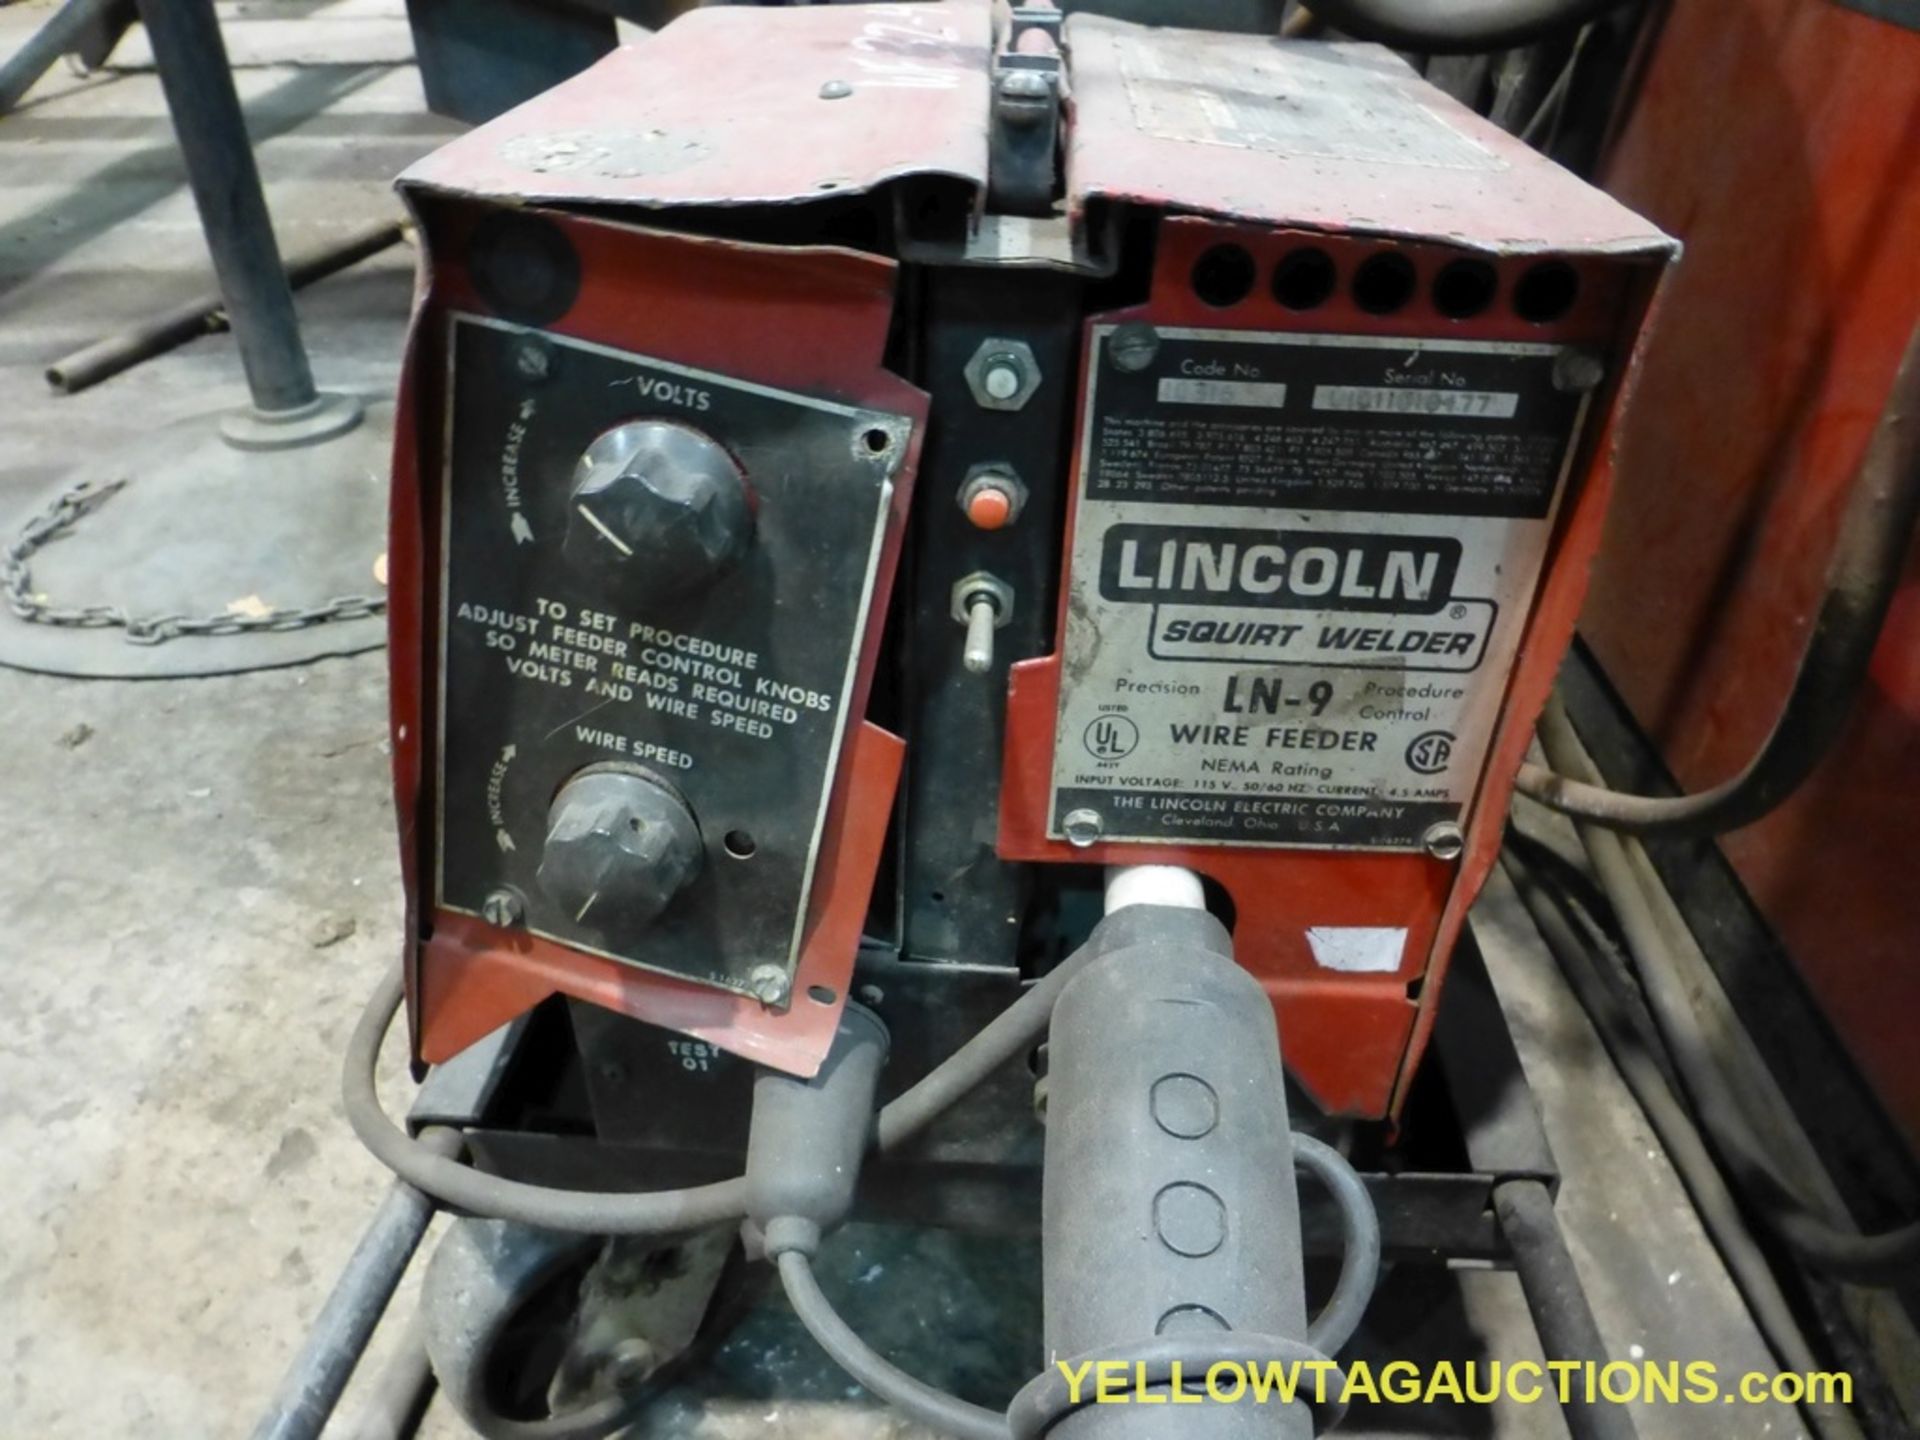 Lincoln Electric DC-600 Welder w/Multiprocess Switch | Includes: Lincoln Wire Feeder LN-9 - Image 7 of 8